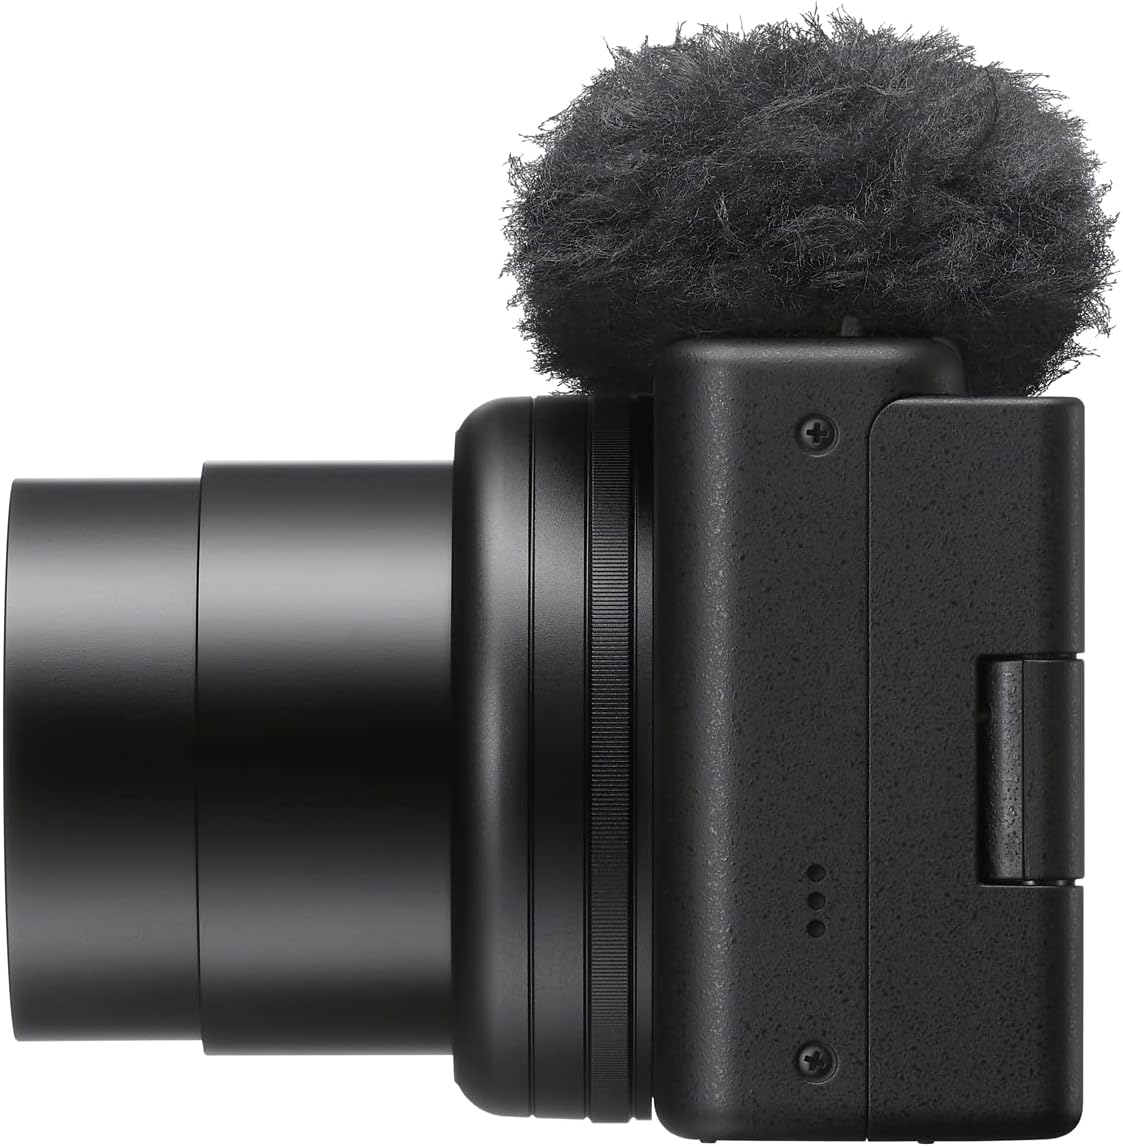 Sony ZV-1M2 Vlog Camera for Content Creators and Vloggers - Black